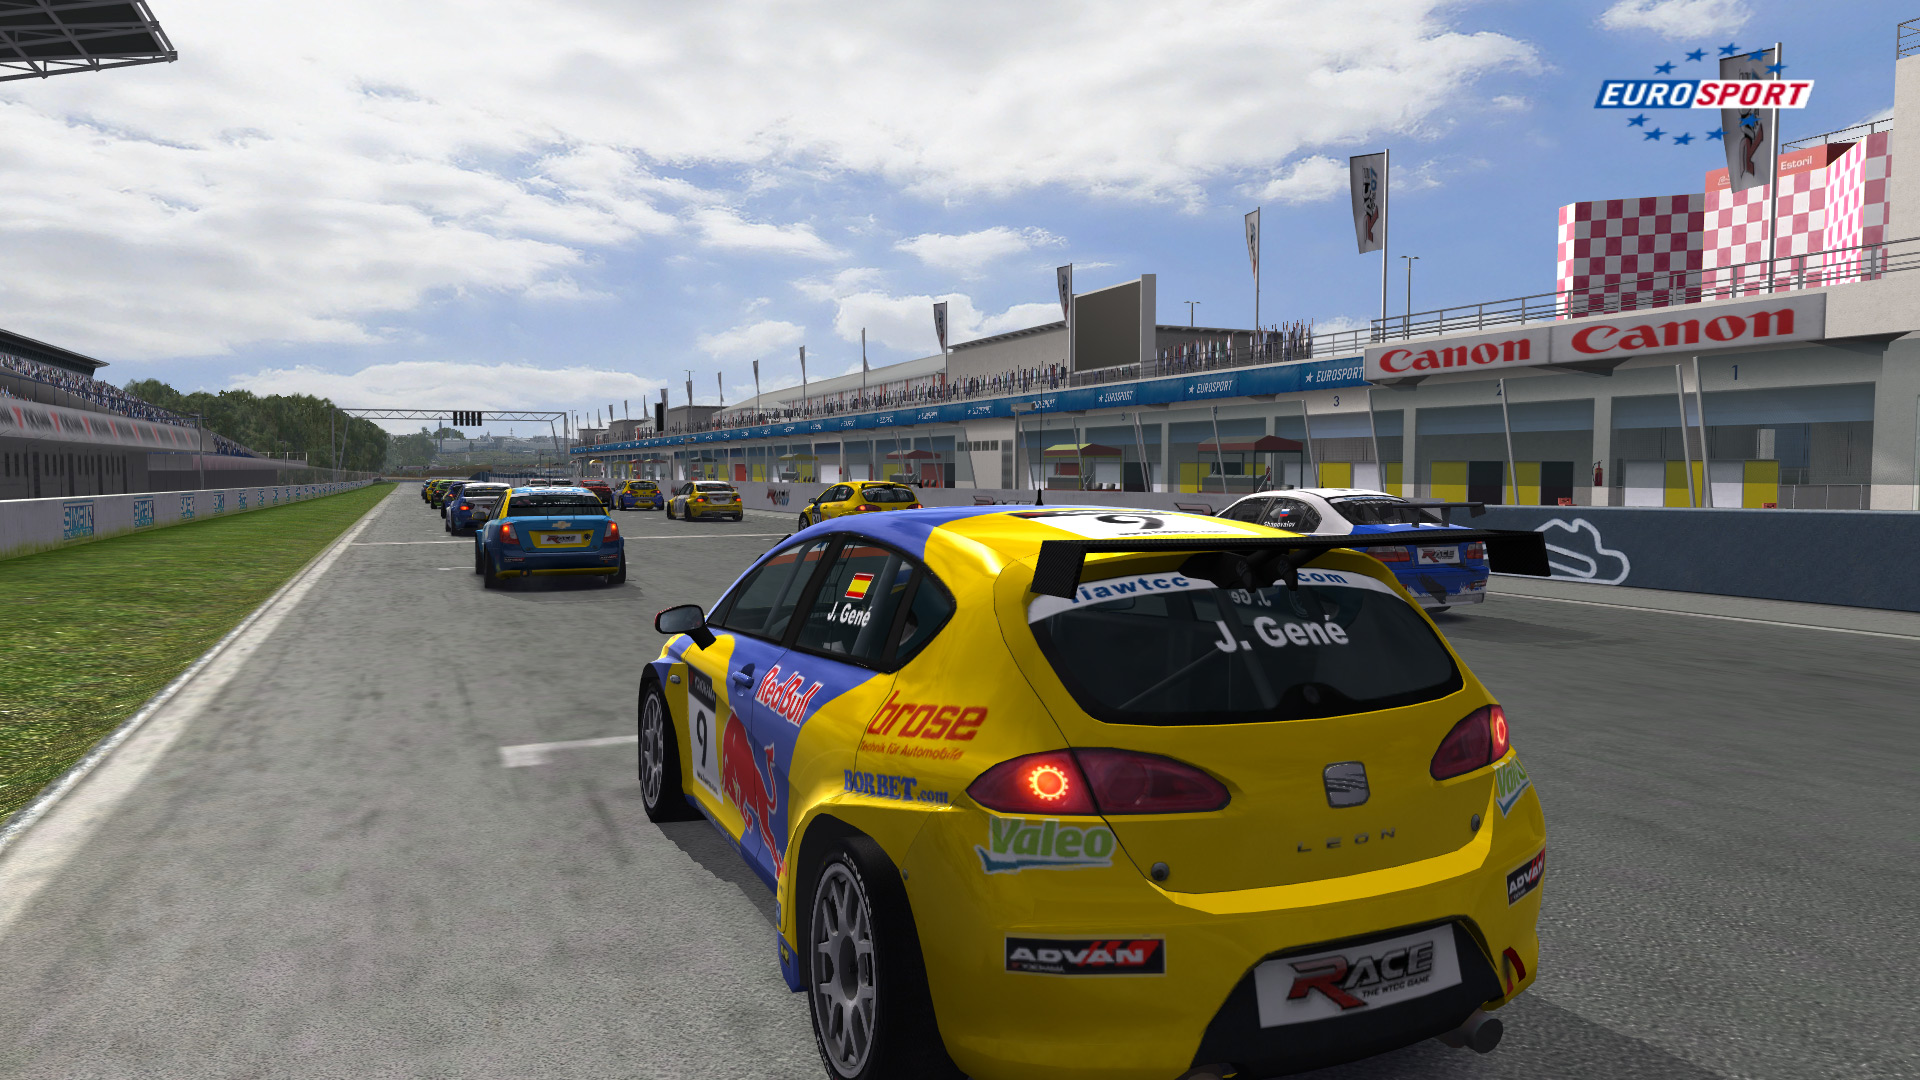 Race07-Graphic-and-Shaders-Playground-Estoril_2007-3.jpg